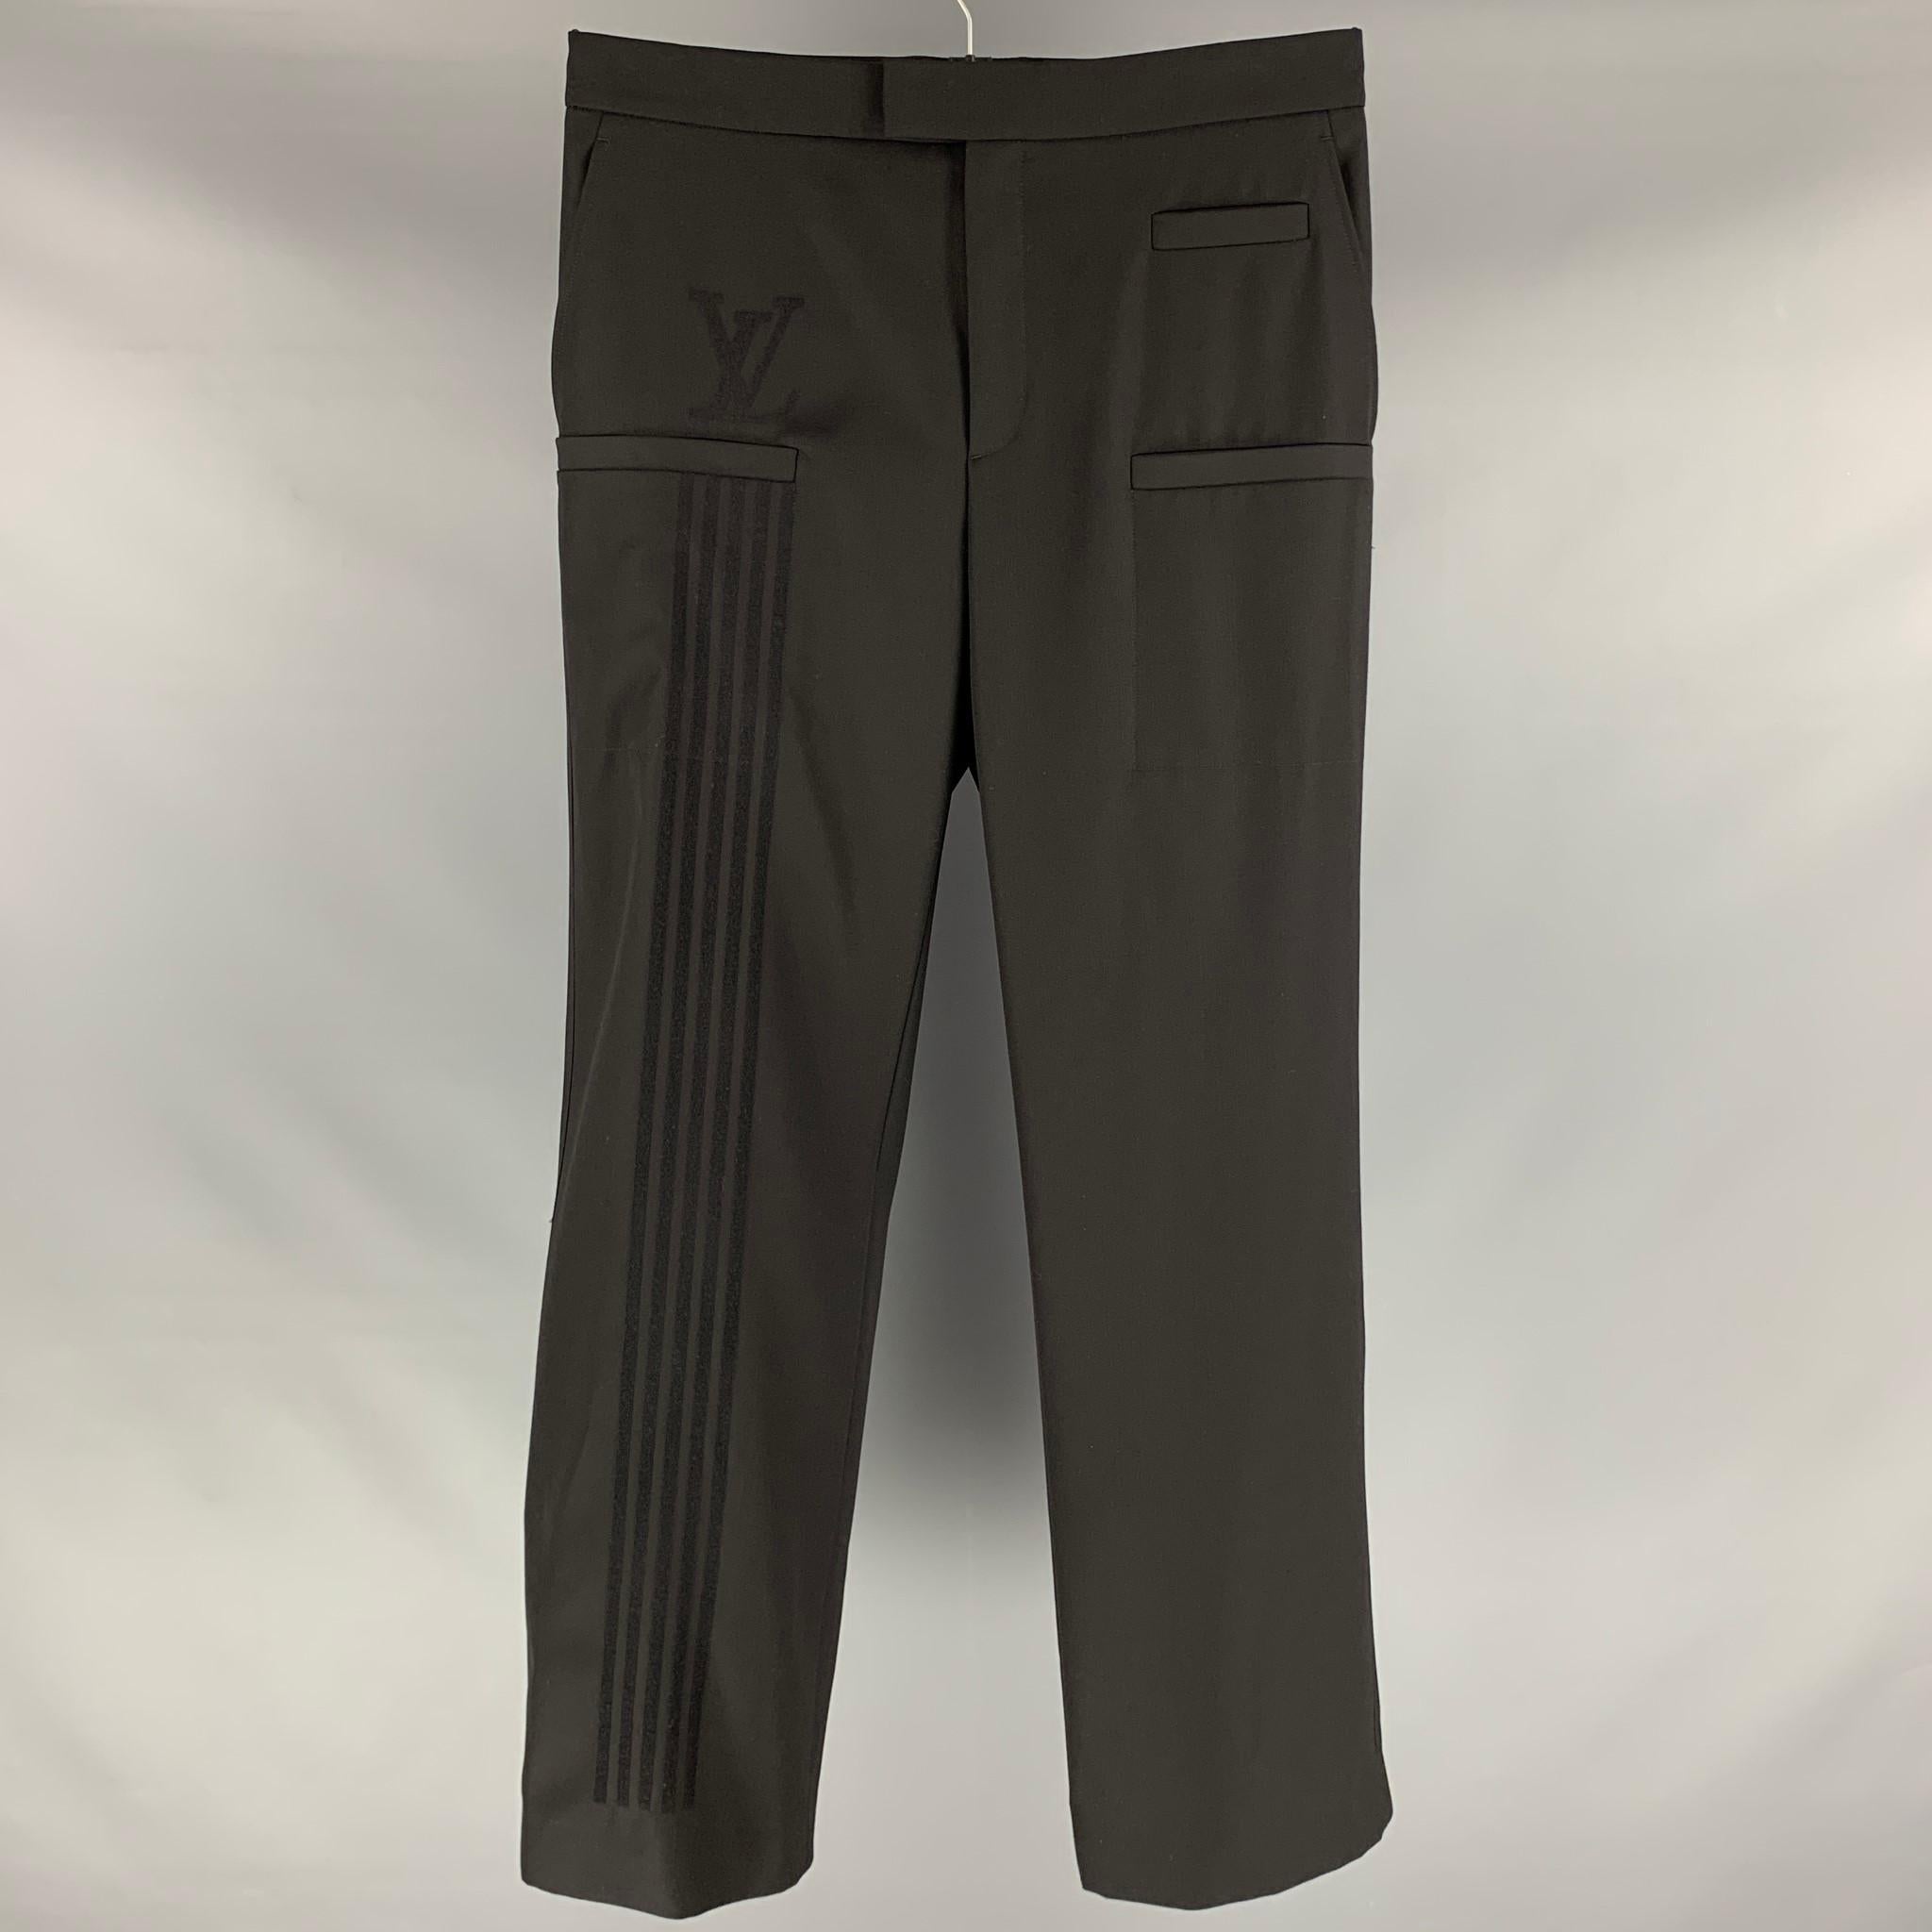 LOUIS VUITTON dress pants comes in a black polyester and wool material featuring a flat front, 3 pockets at front, logo applique detail right leg, medium waist style, front tab, and a zip fly closure. Made in Italy.

Excellent Pre-Owned